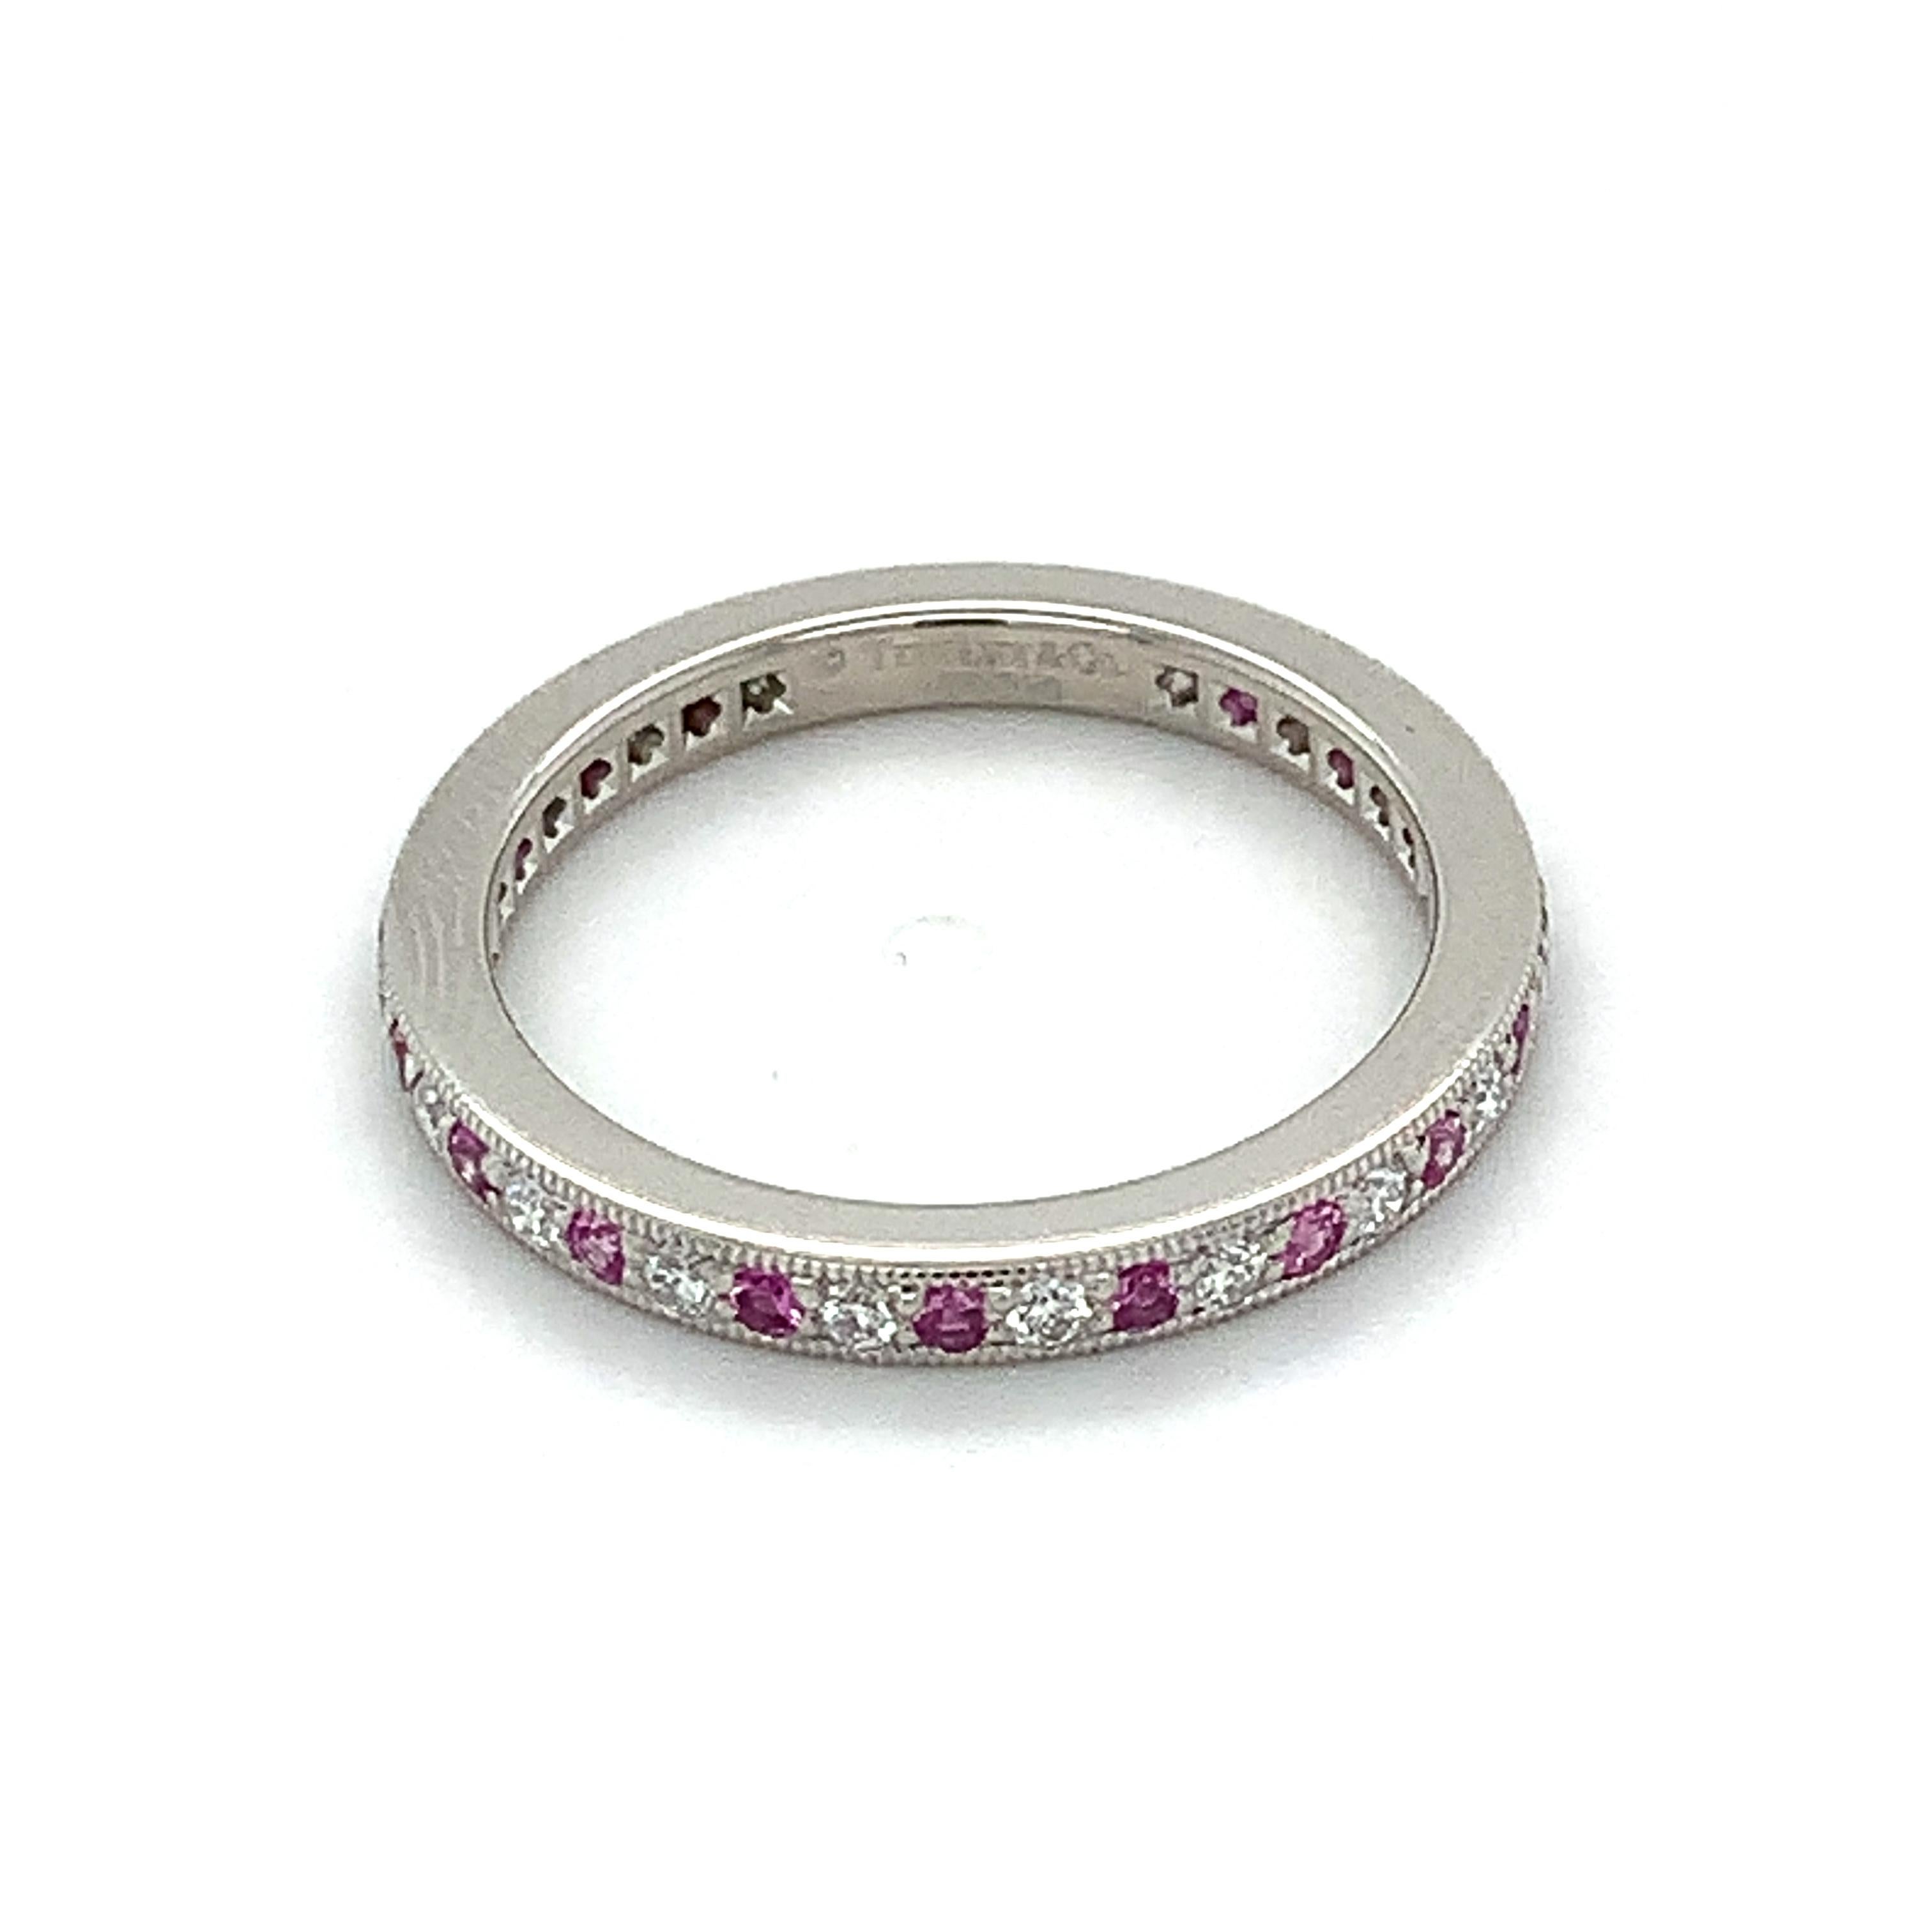 Tiffany & Co Platinum Round Diamond & Pink Sapphire Band
Ring Size 6.25
4.1 Grams
White Round Brilliant Cut Diamonds 0.19 Carats Total Weight
Color: F
Clarity: VS2
Pink Round Sapphires 0.24 Carats Total Weight

This is a beautiful Tiffany & Co.